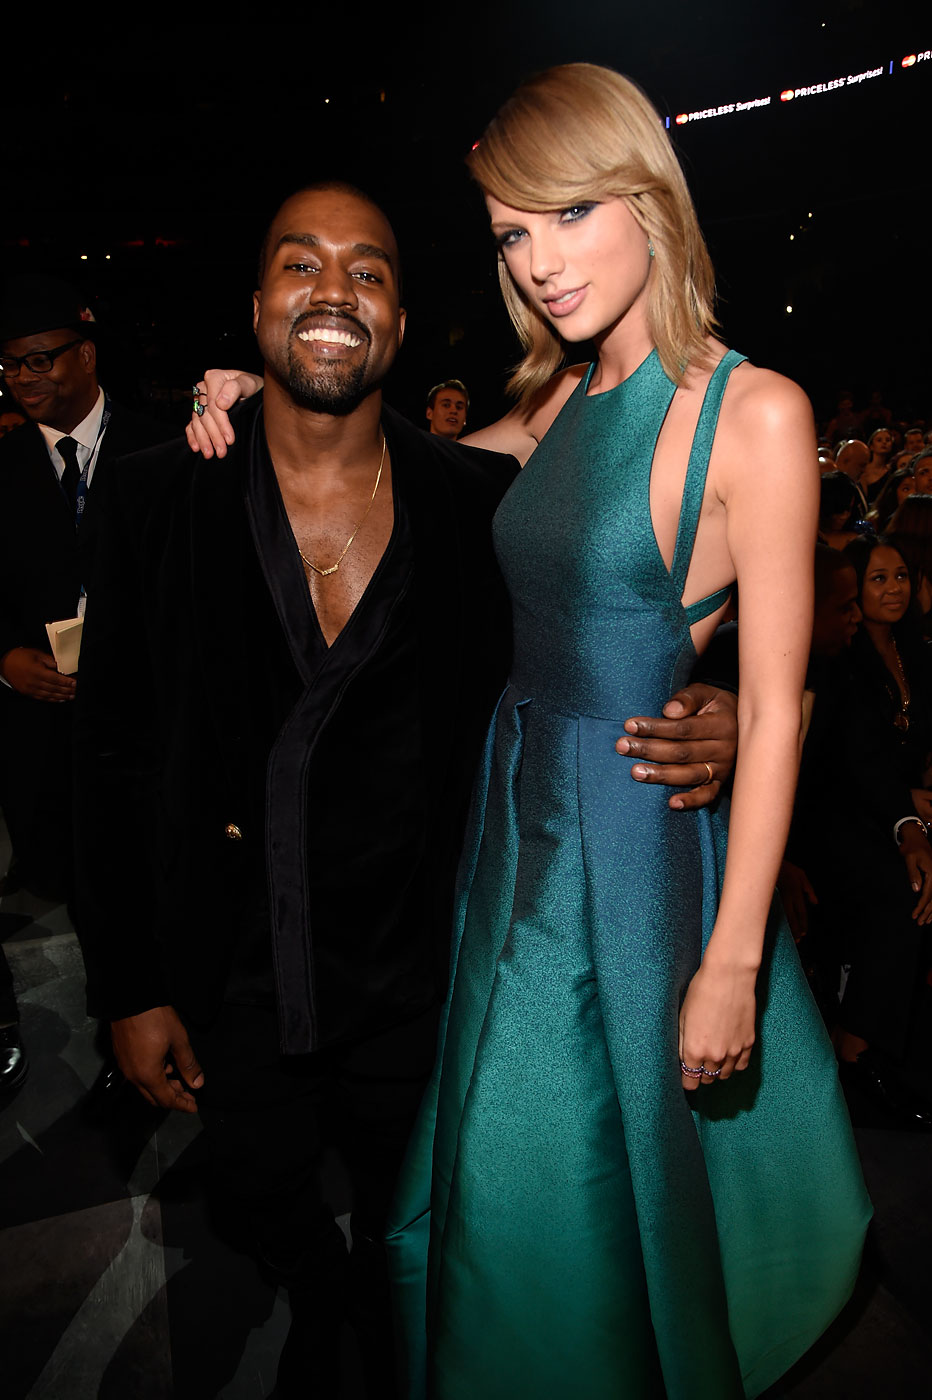 Kanye West and Taylor Swift attend the 57th Annual Grammy Awards in Los Angeles, Feb. 8, 2015. (Kevin Mazur—WireImage/Getty Images)